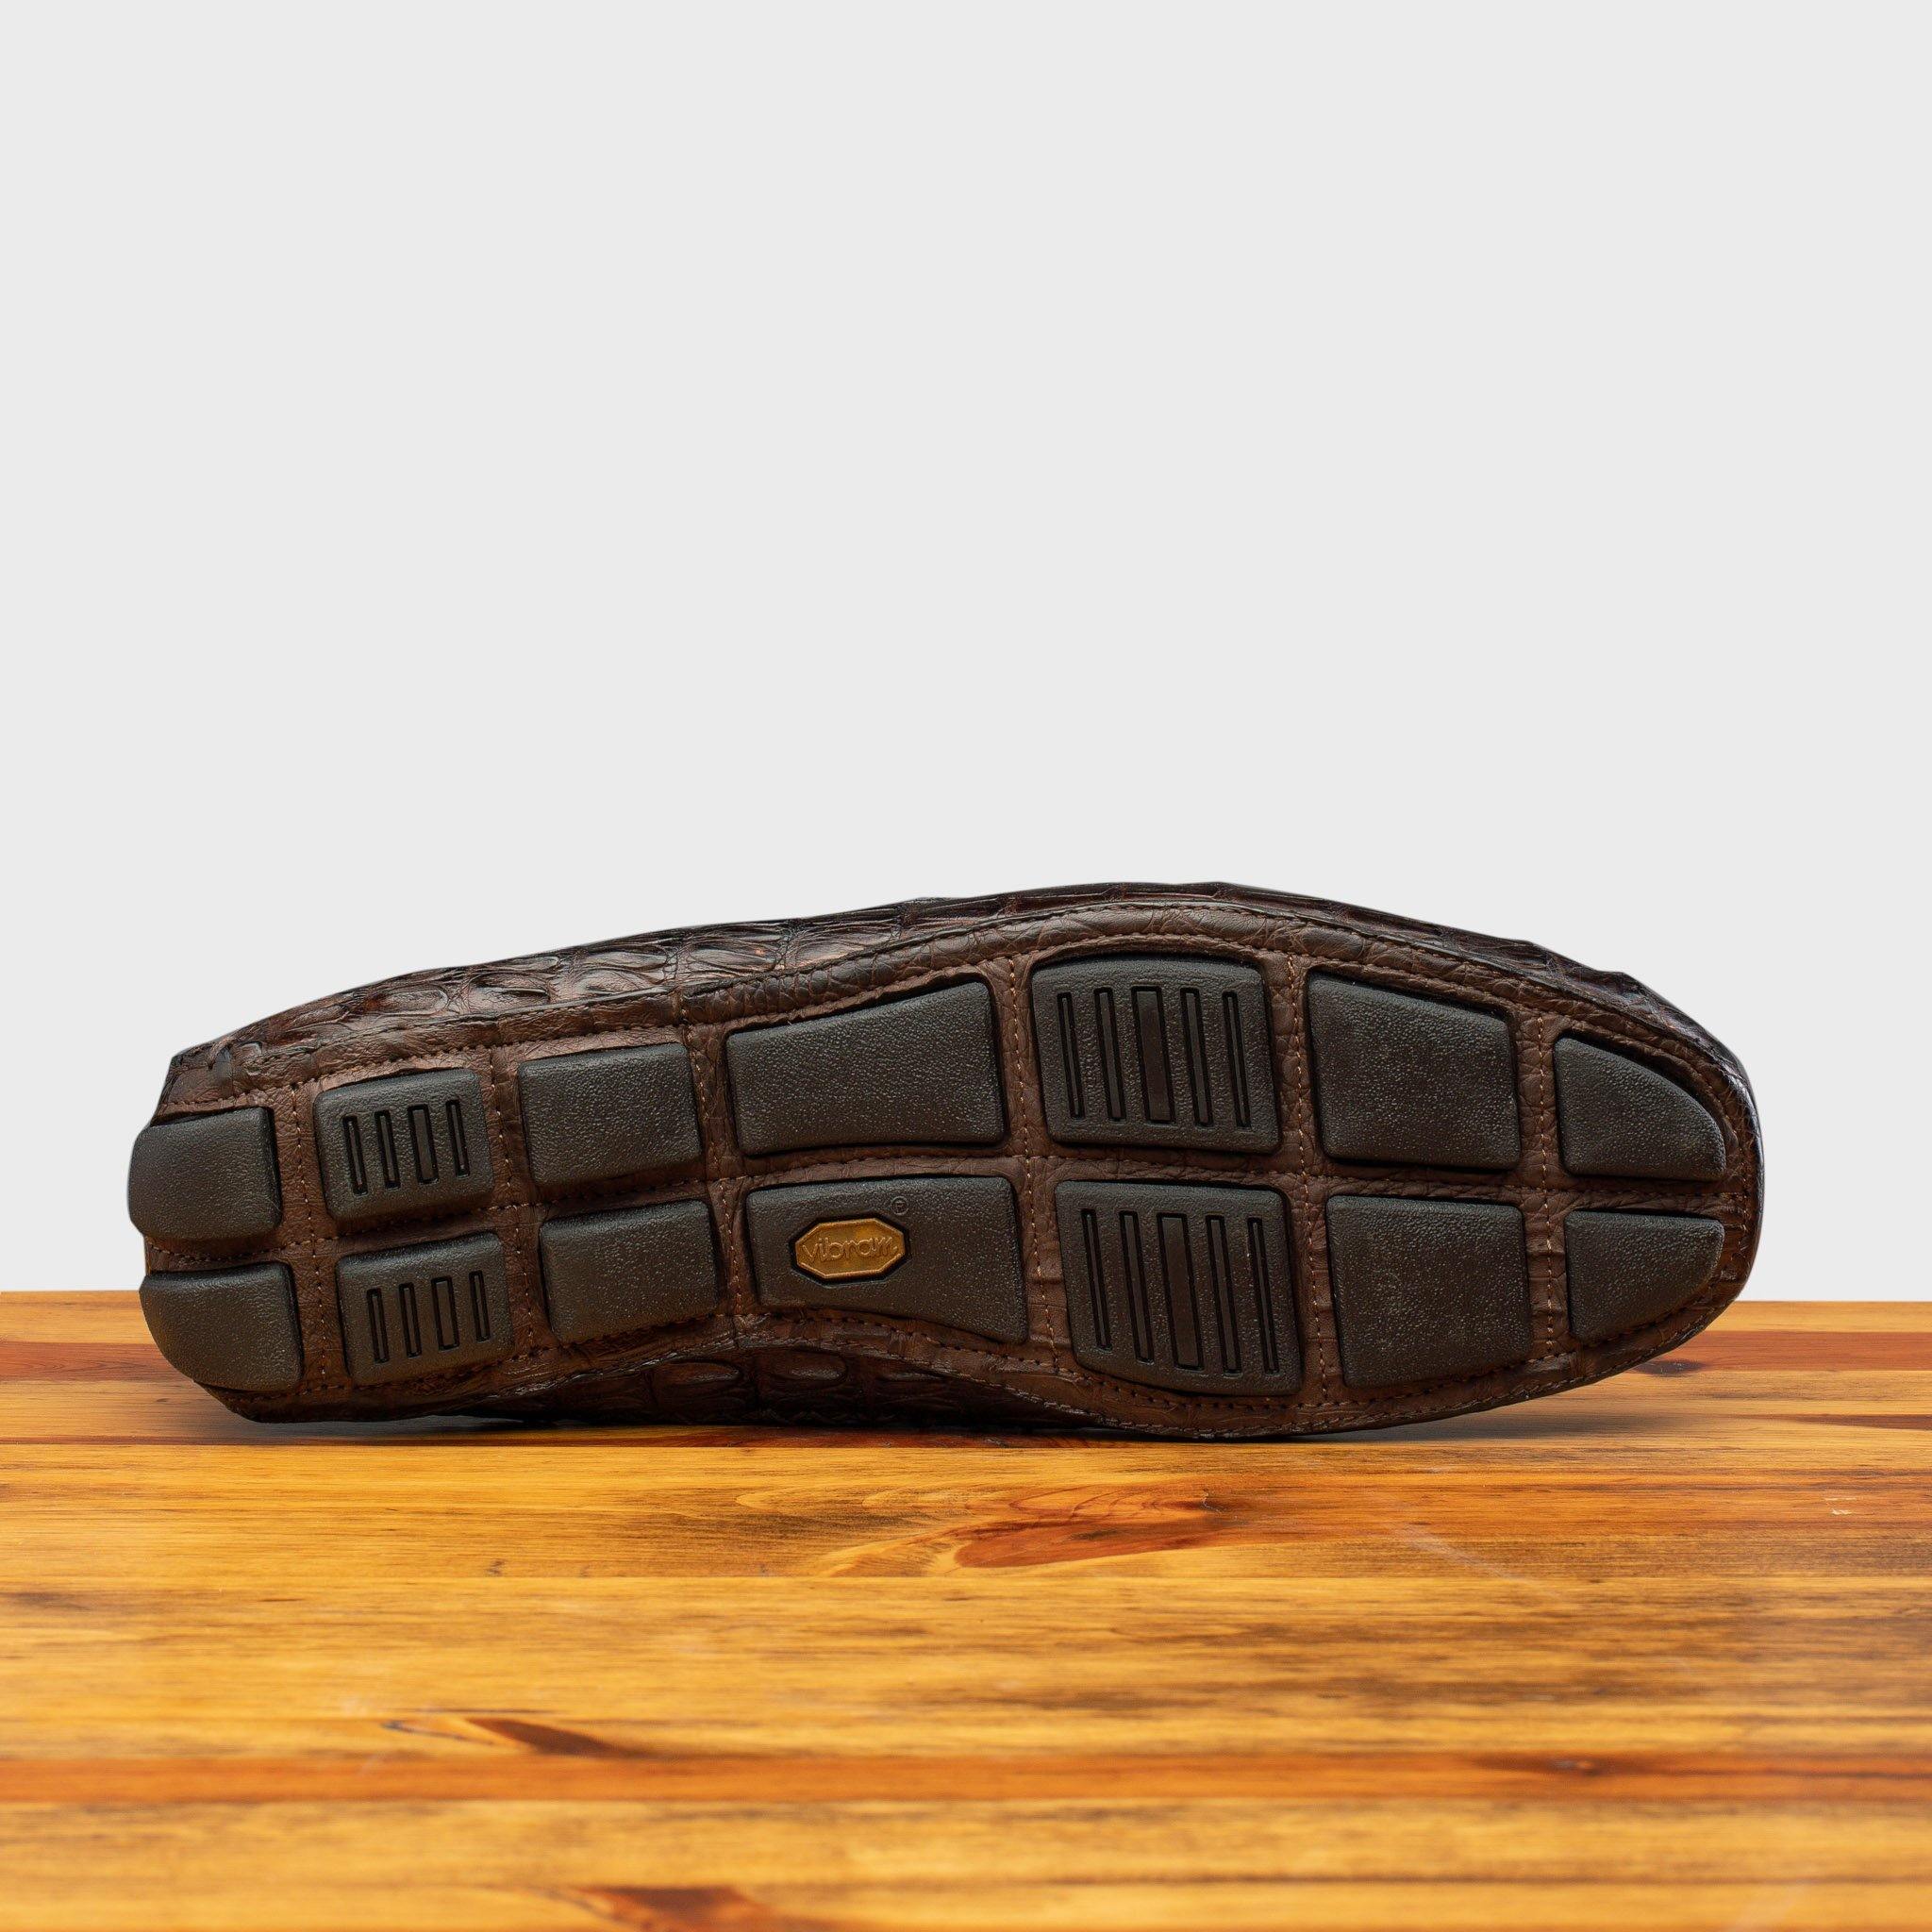 Full Rubber Vibram Outsole showing crocodile fully wrapped on the outsole of 4551 Calzoleria Toscana Dark Brown Crocodile Dip-Dyed Driver on top of a wooden table